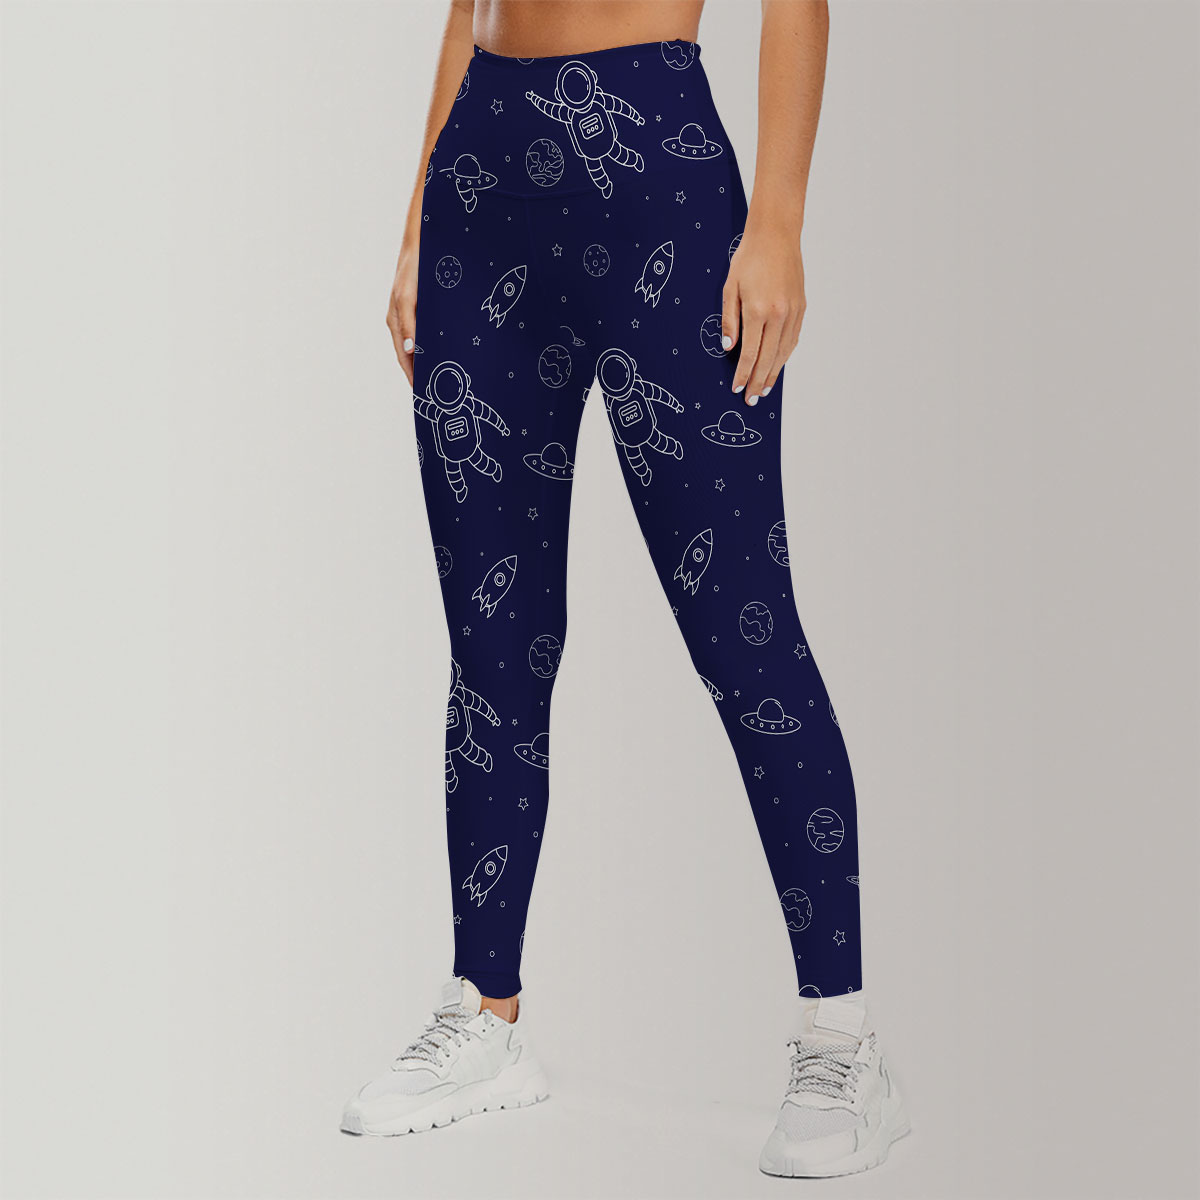 Astronaut And Outer Space Legging